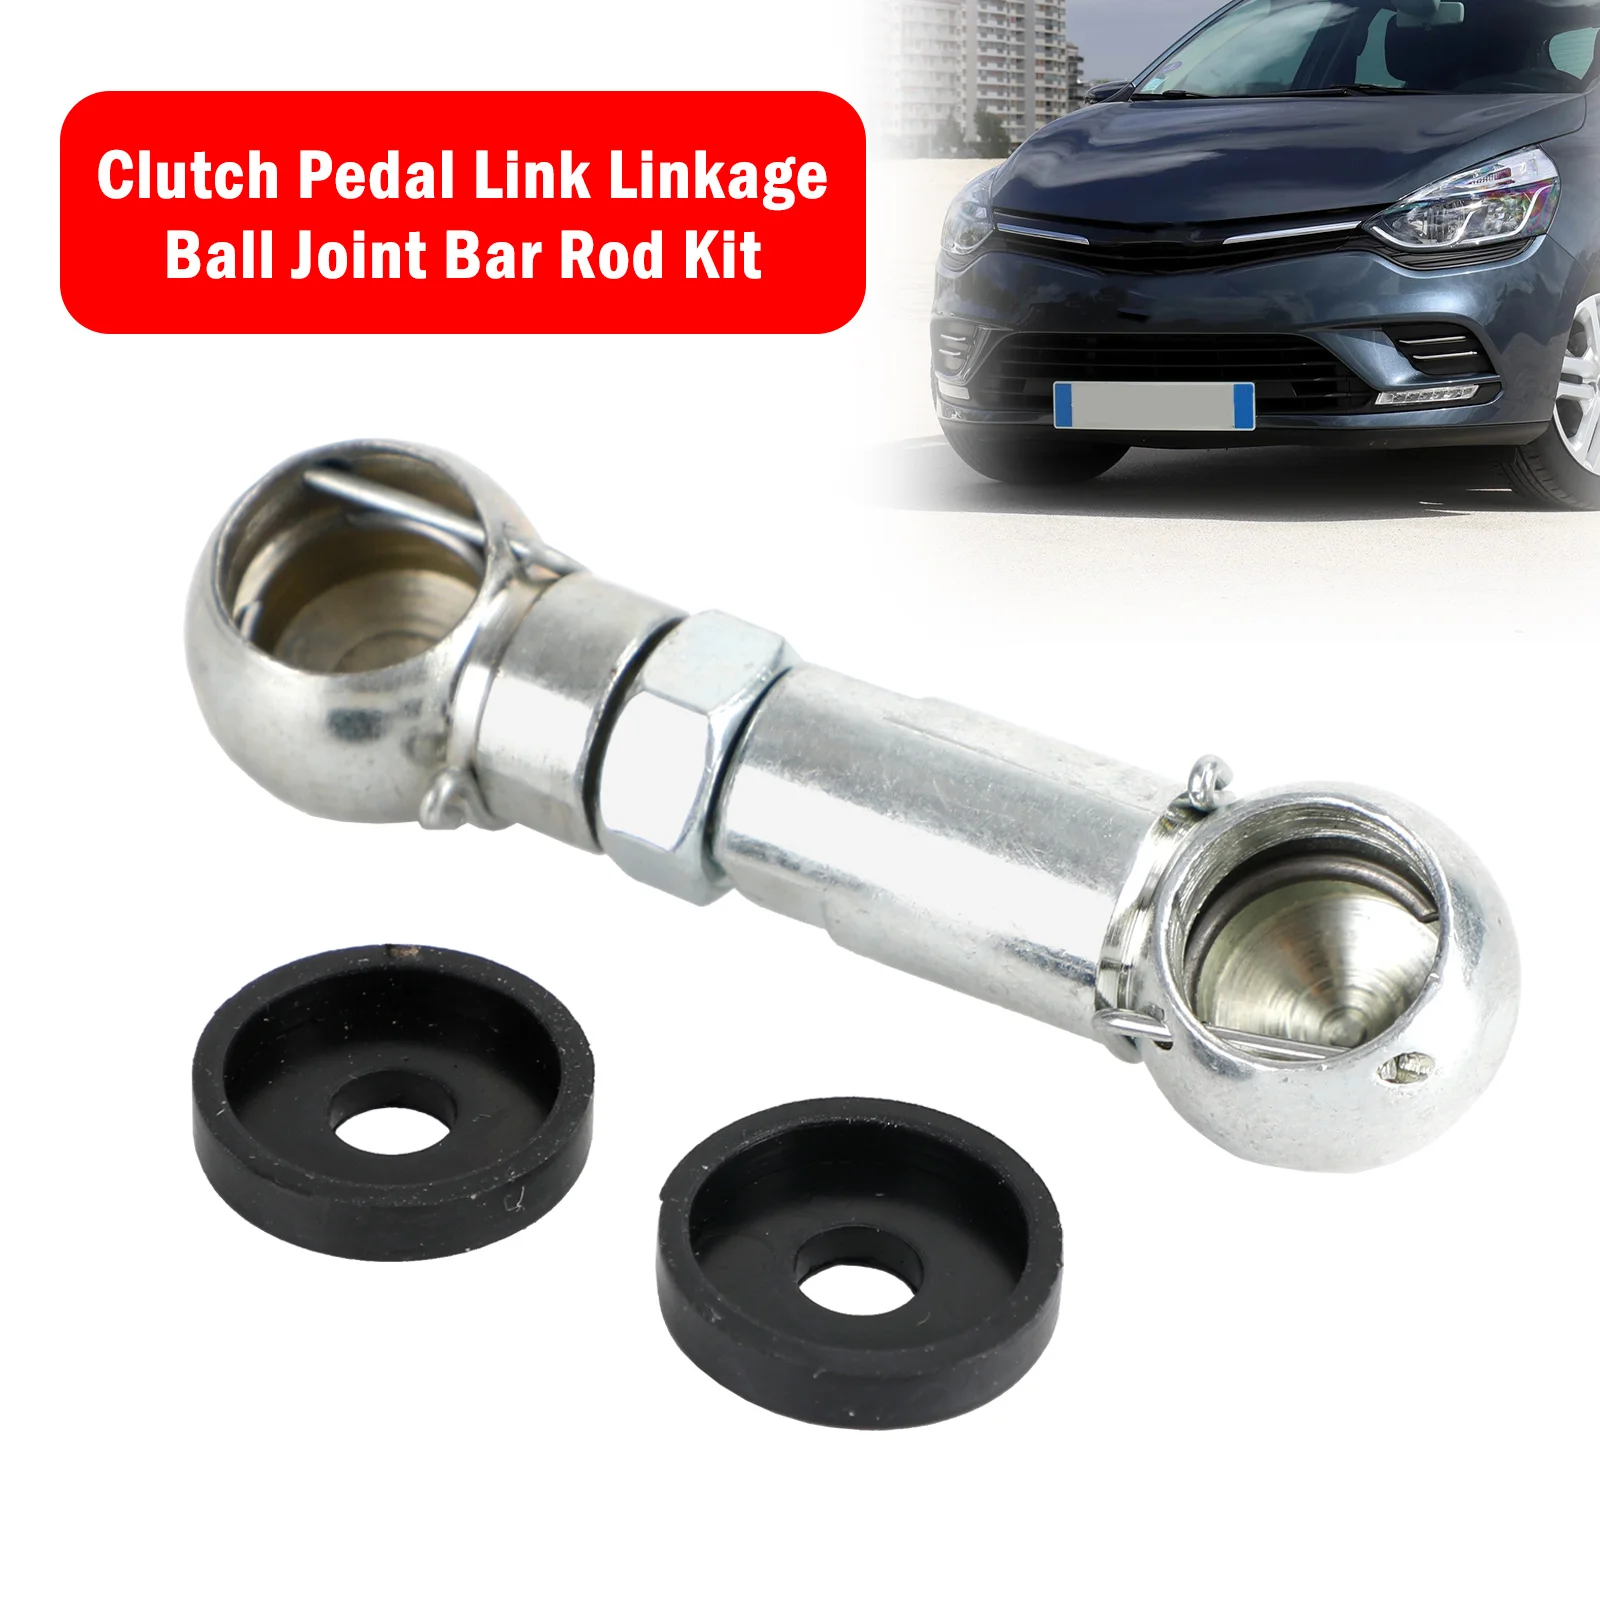 Artudatech Clutch Pedal Link Linkage Ball Joint Bar Rod Kit For Renault Clio Twingo Kangoo Car Accessories